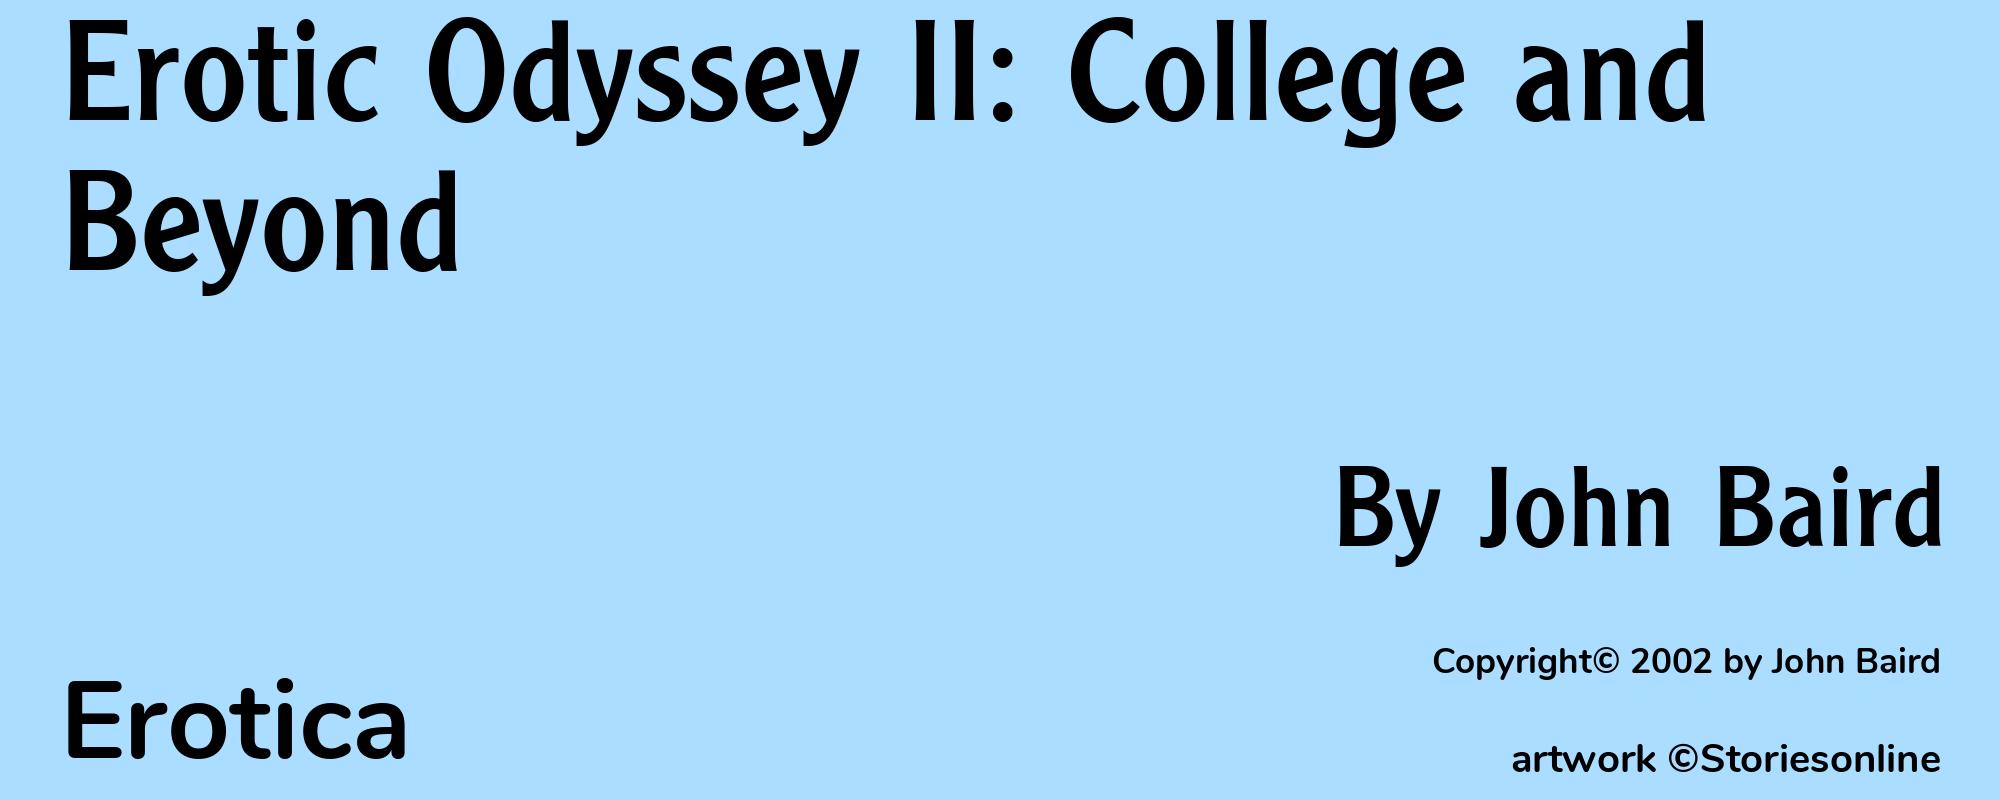 Erotic Odyssey II: College and Beyond - Cover